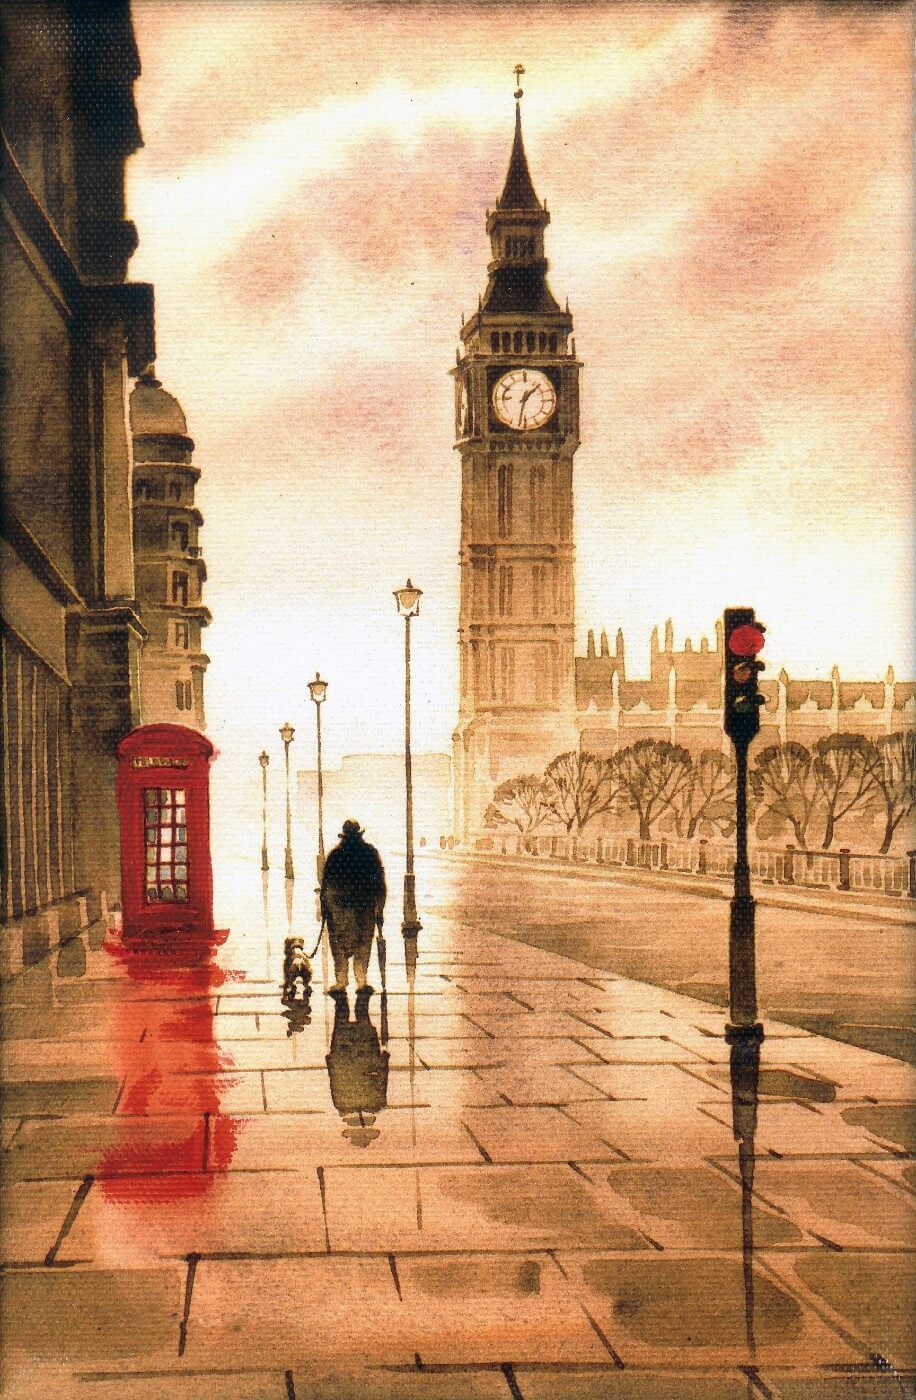 Very British - London Photo and Painting Collection - Large Art Prints by  Sarah, Buy Posters, Frames, Canvas & Digital Art Prints